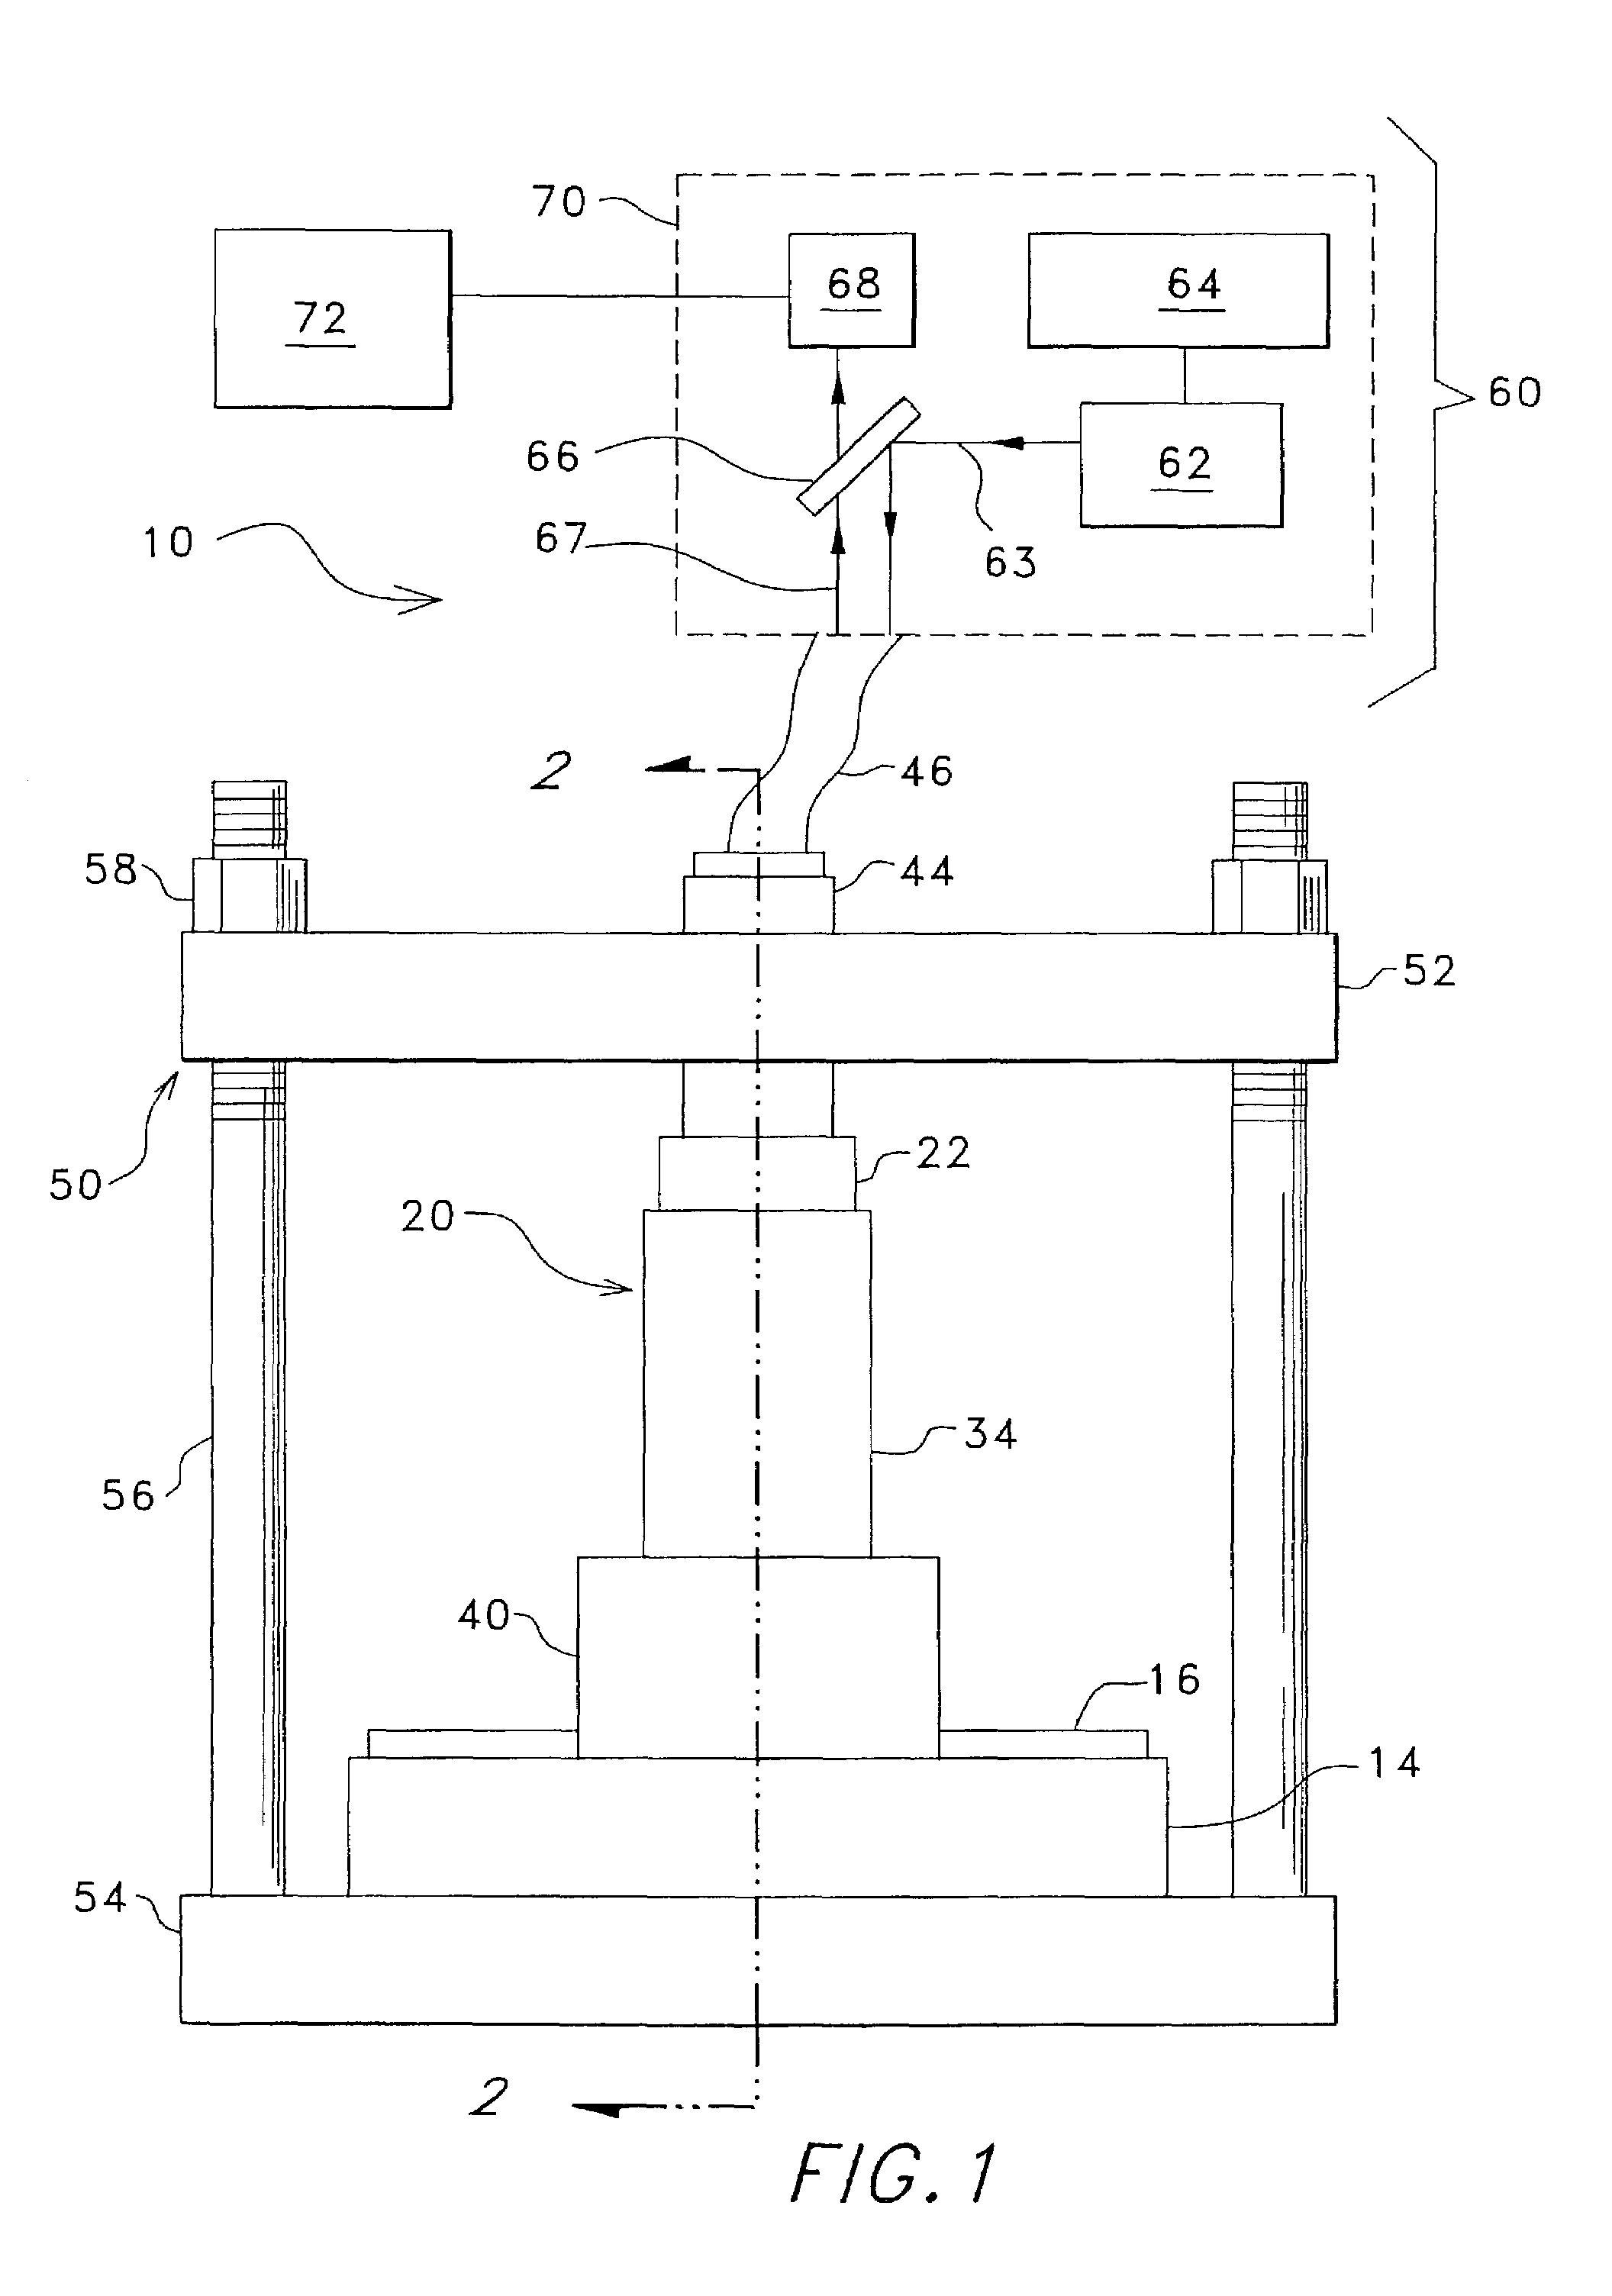 Method and apparatus for determining diffusible hydrogen concentrations